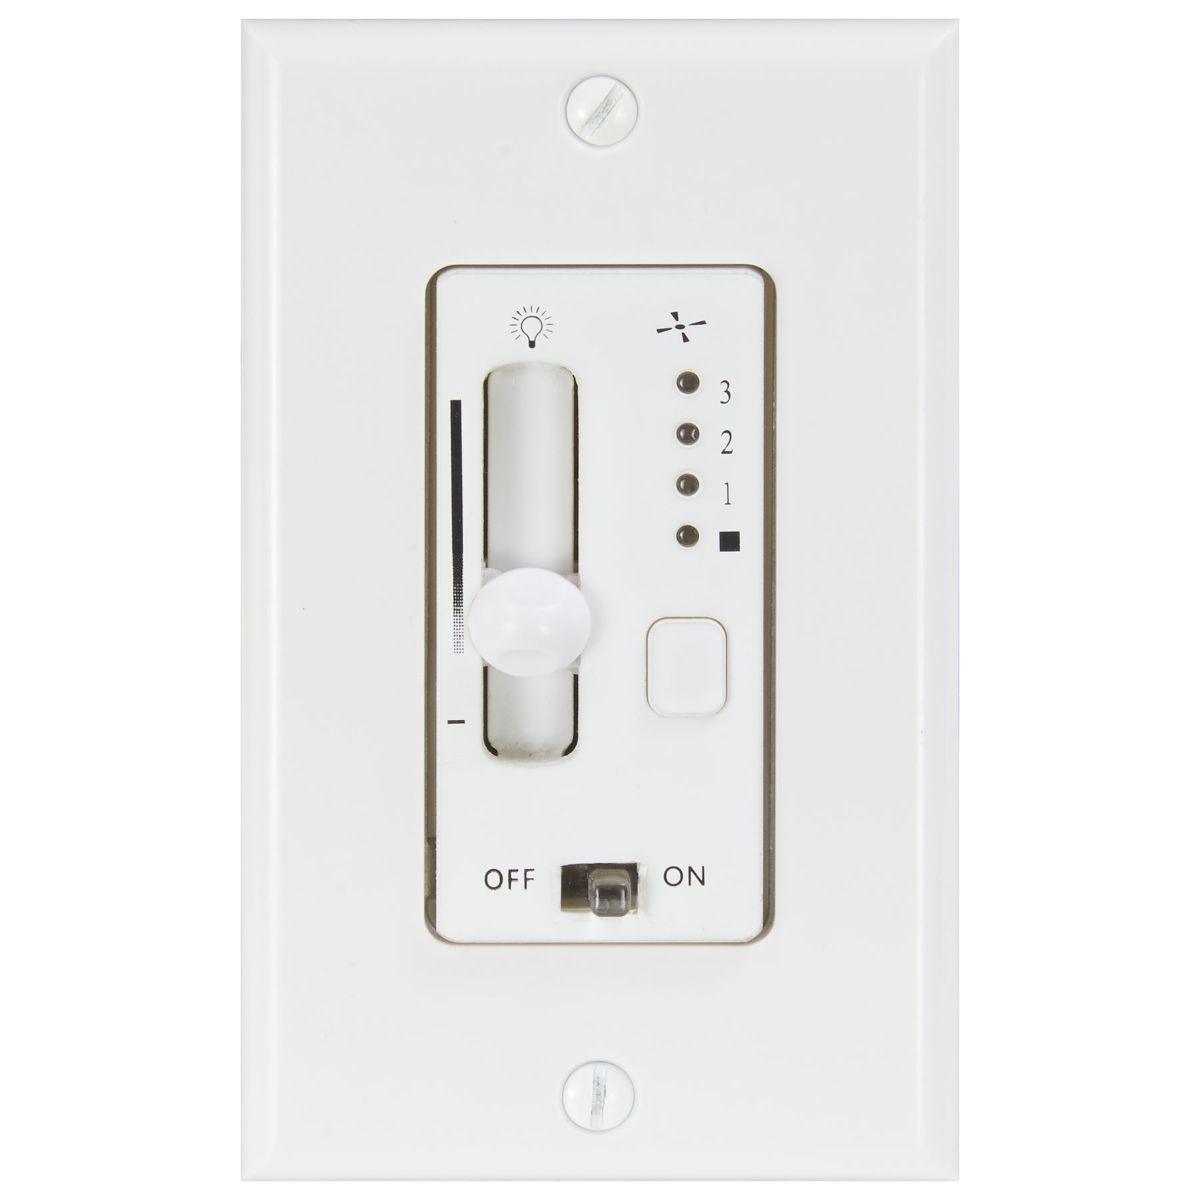 3-Speed Dimmer Ceiling Fan Control With Wallplate Switch, White Finish - Bees Lighting